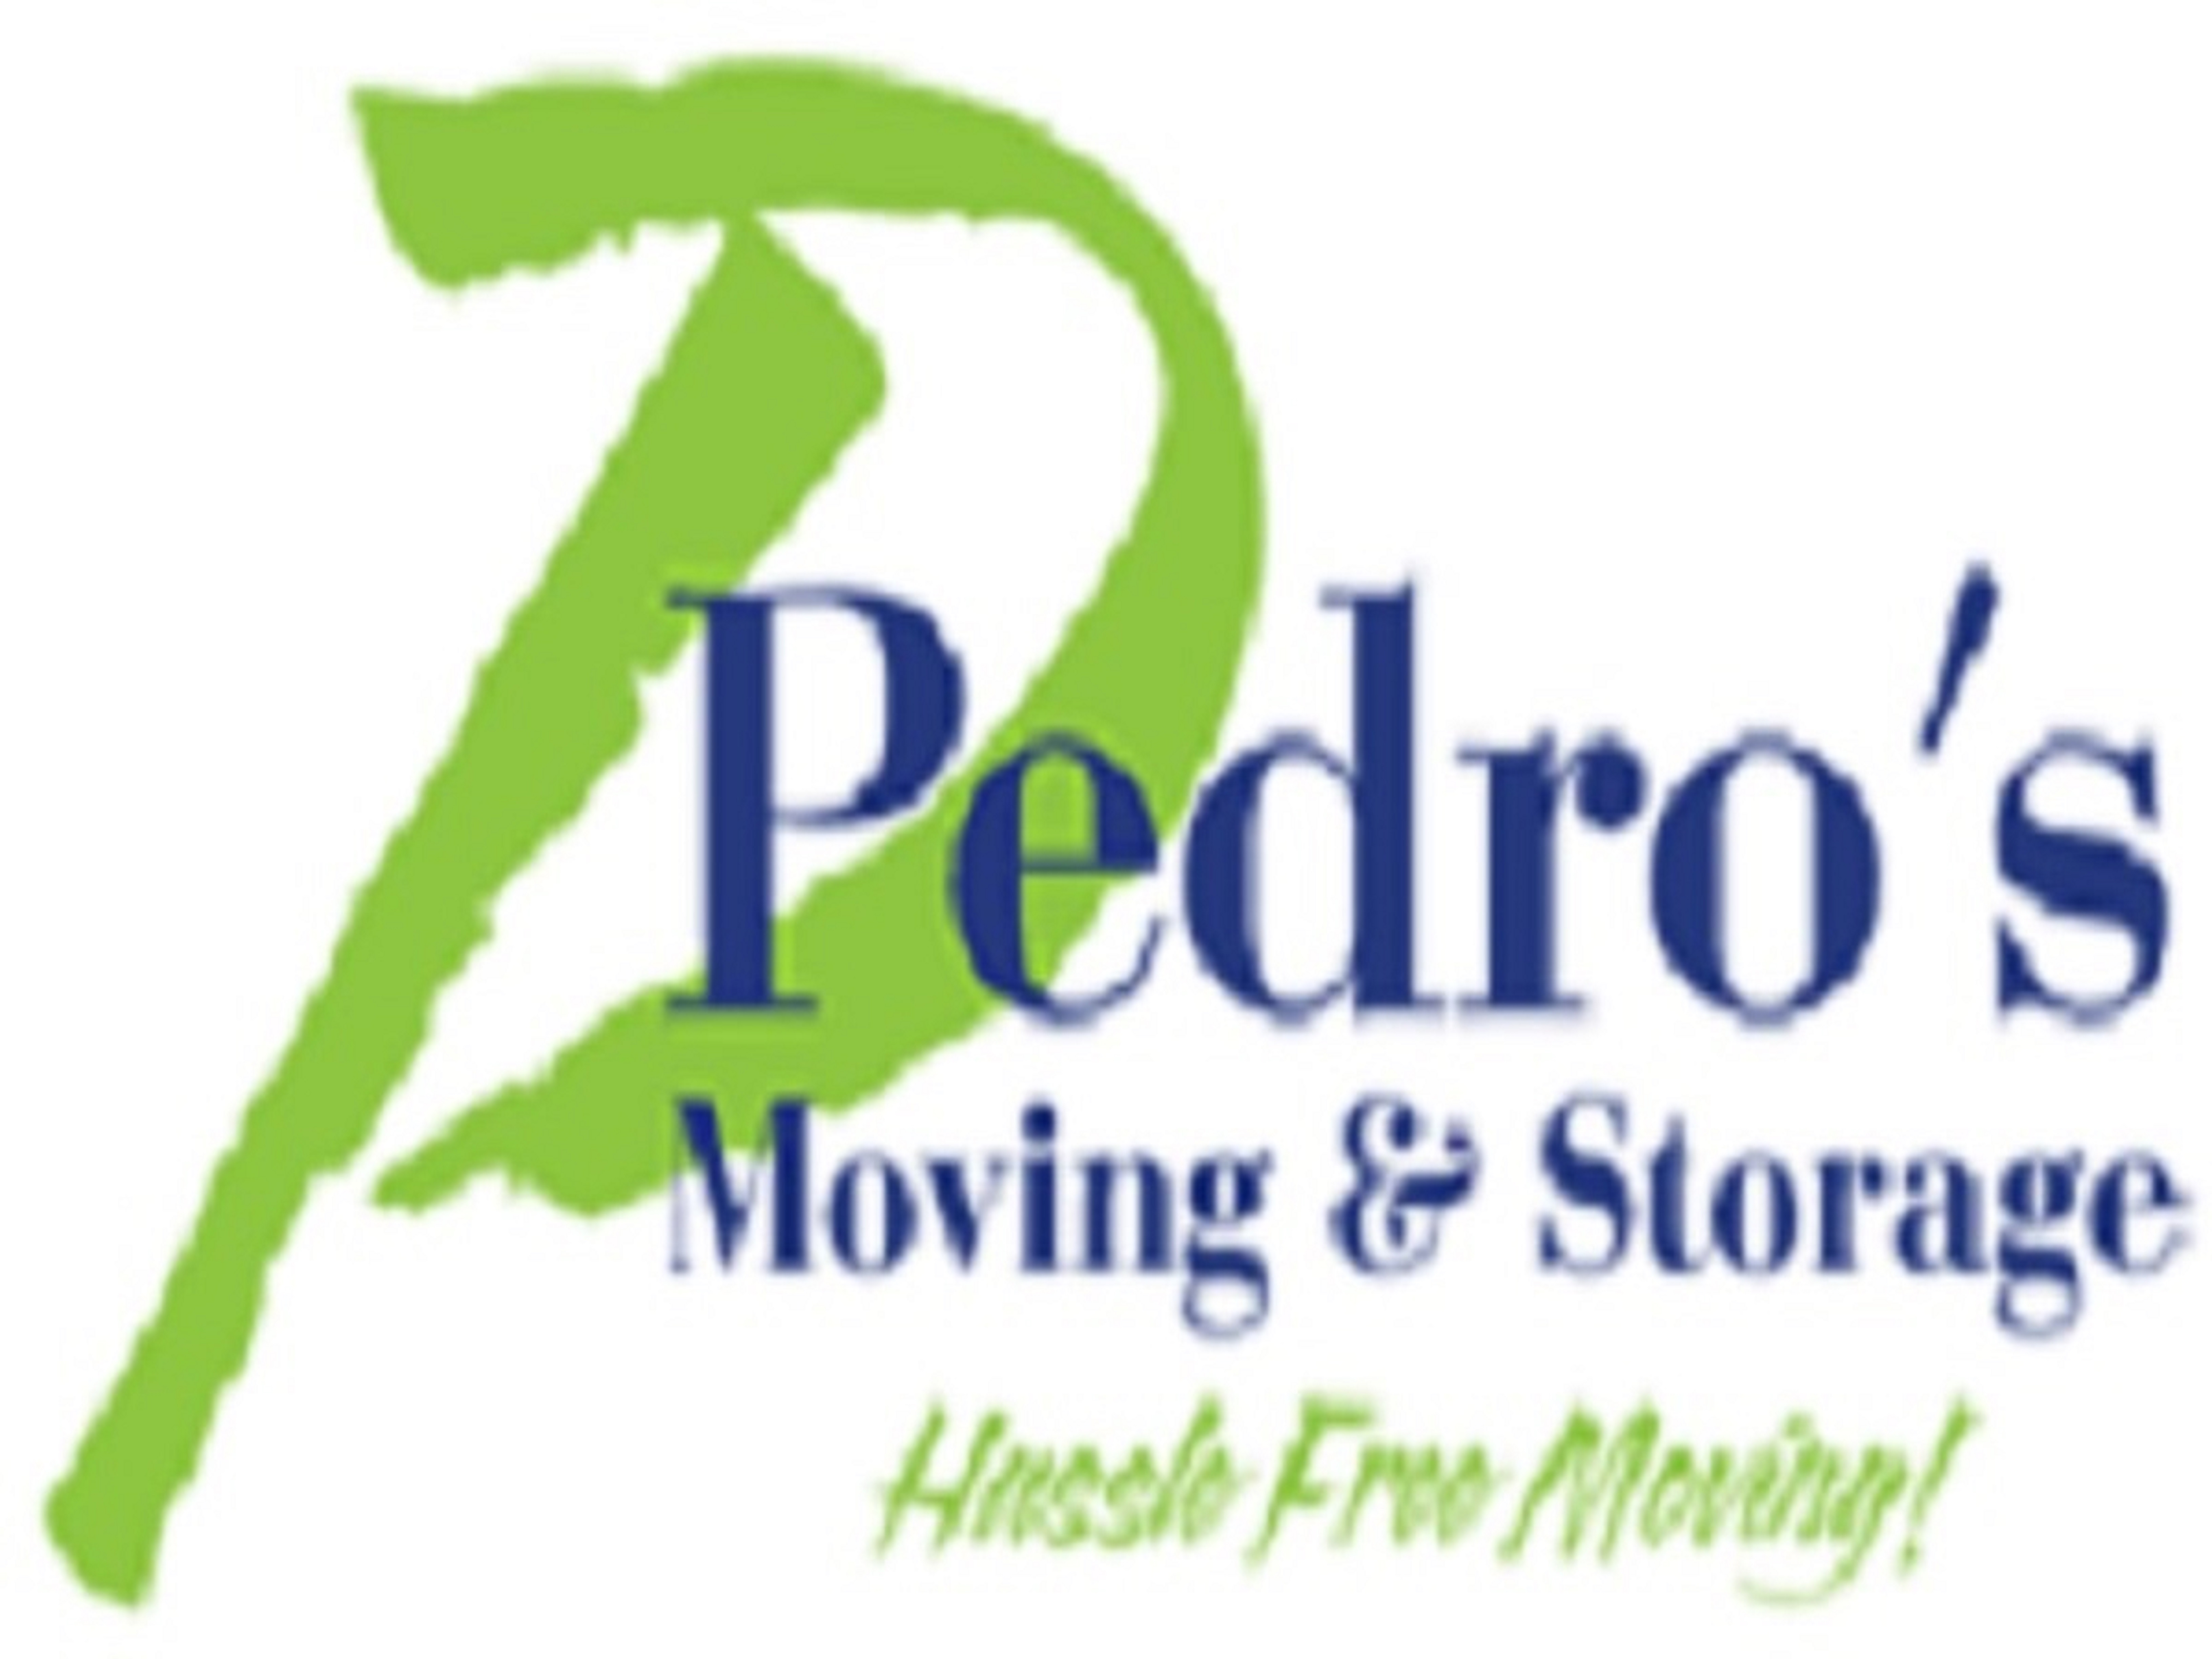 Pedro's Moving Services - Los Angeles